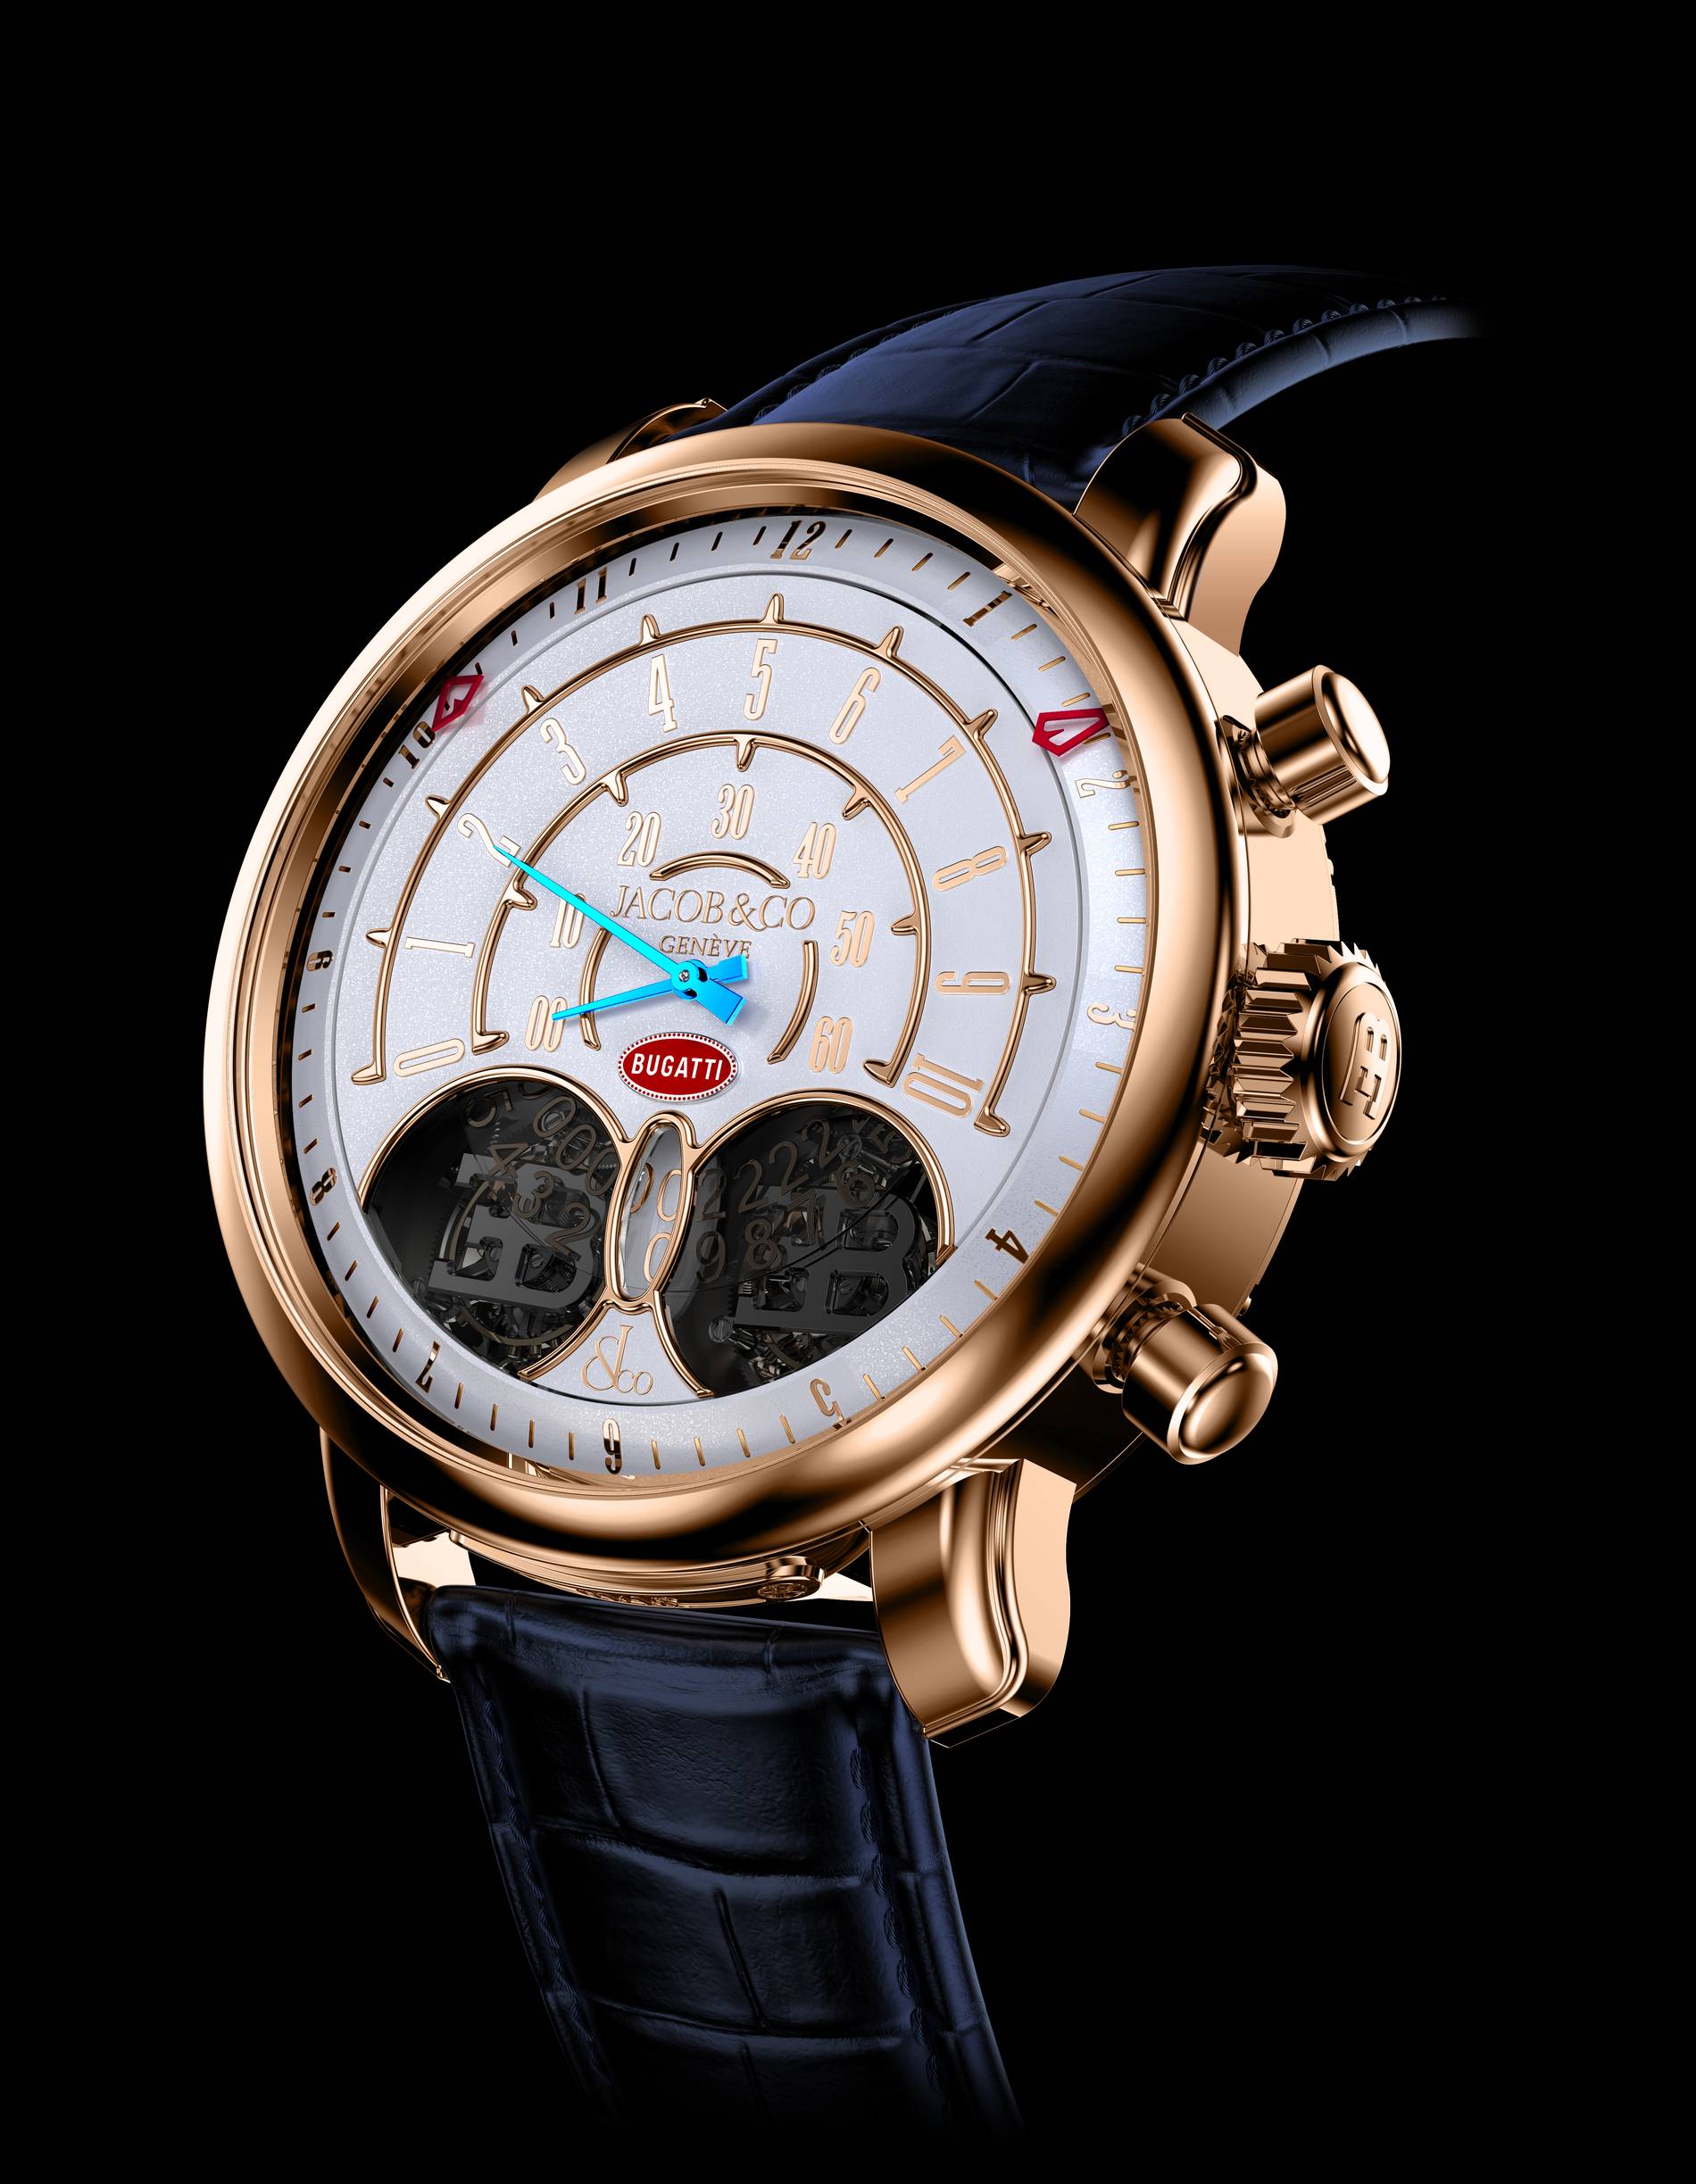 Jean Bugatti timepiece in Rose gold and white, from Jacob & Co